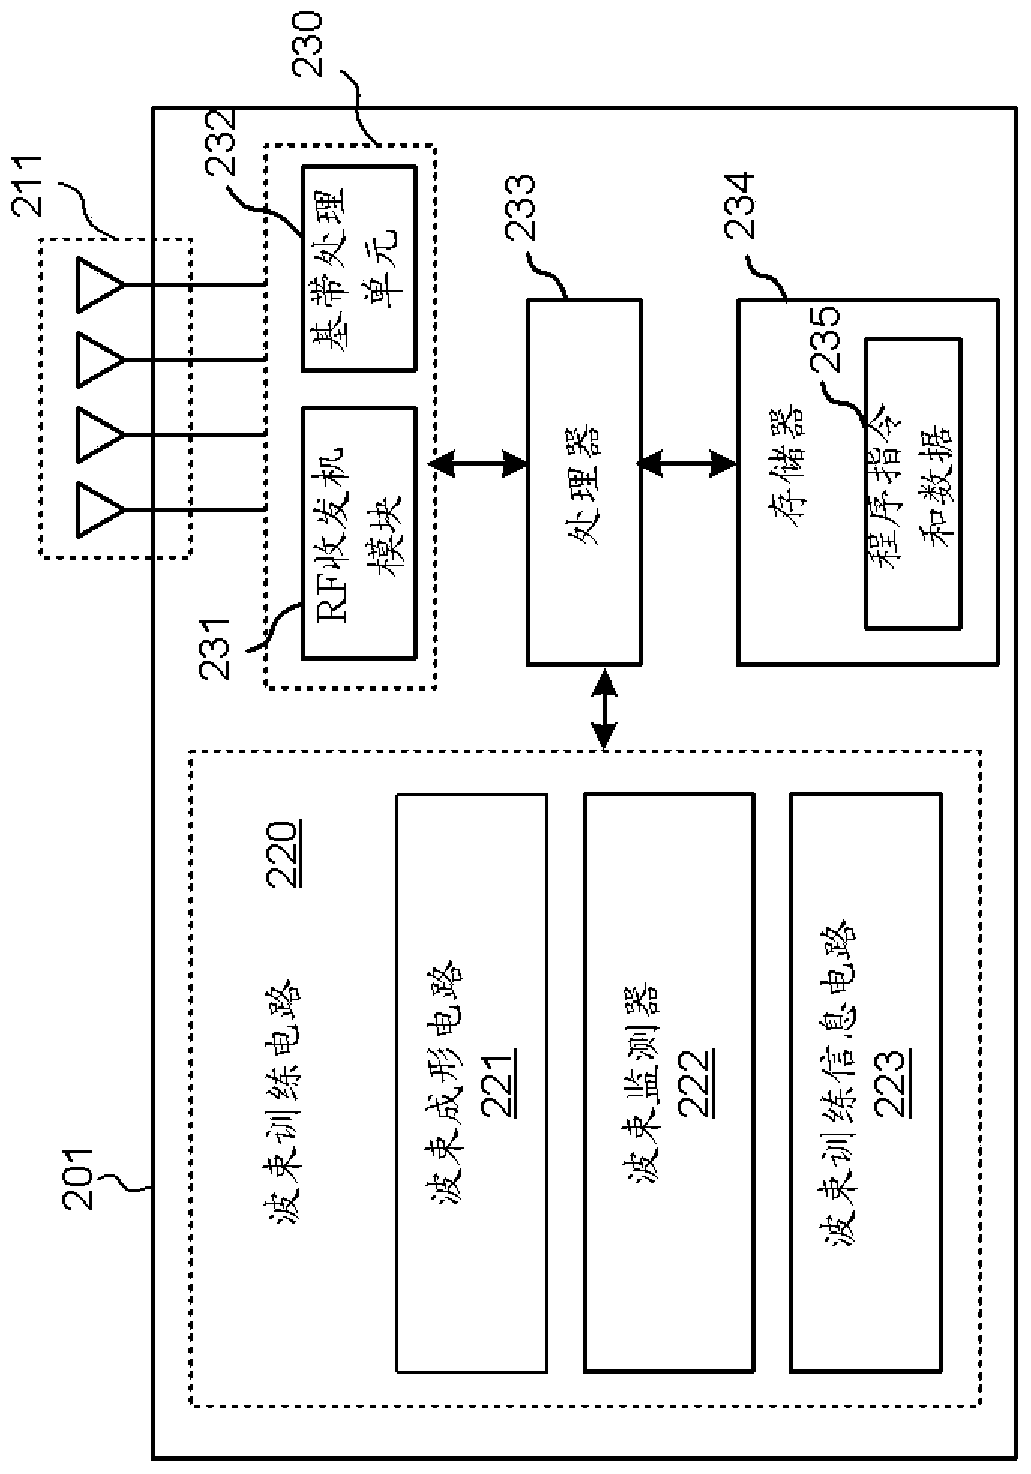 Beamforming method and wireless device